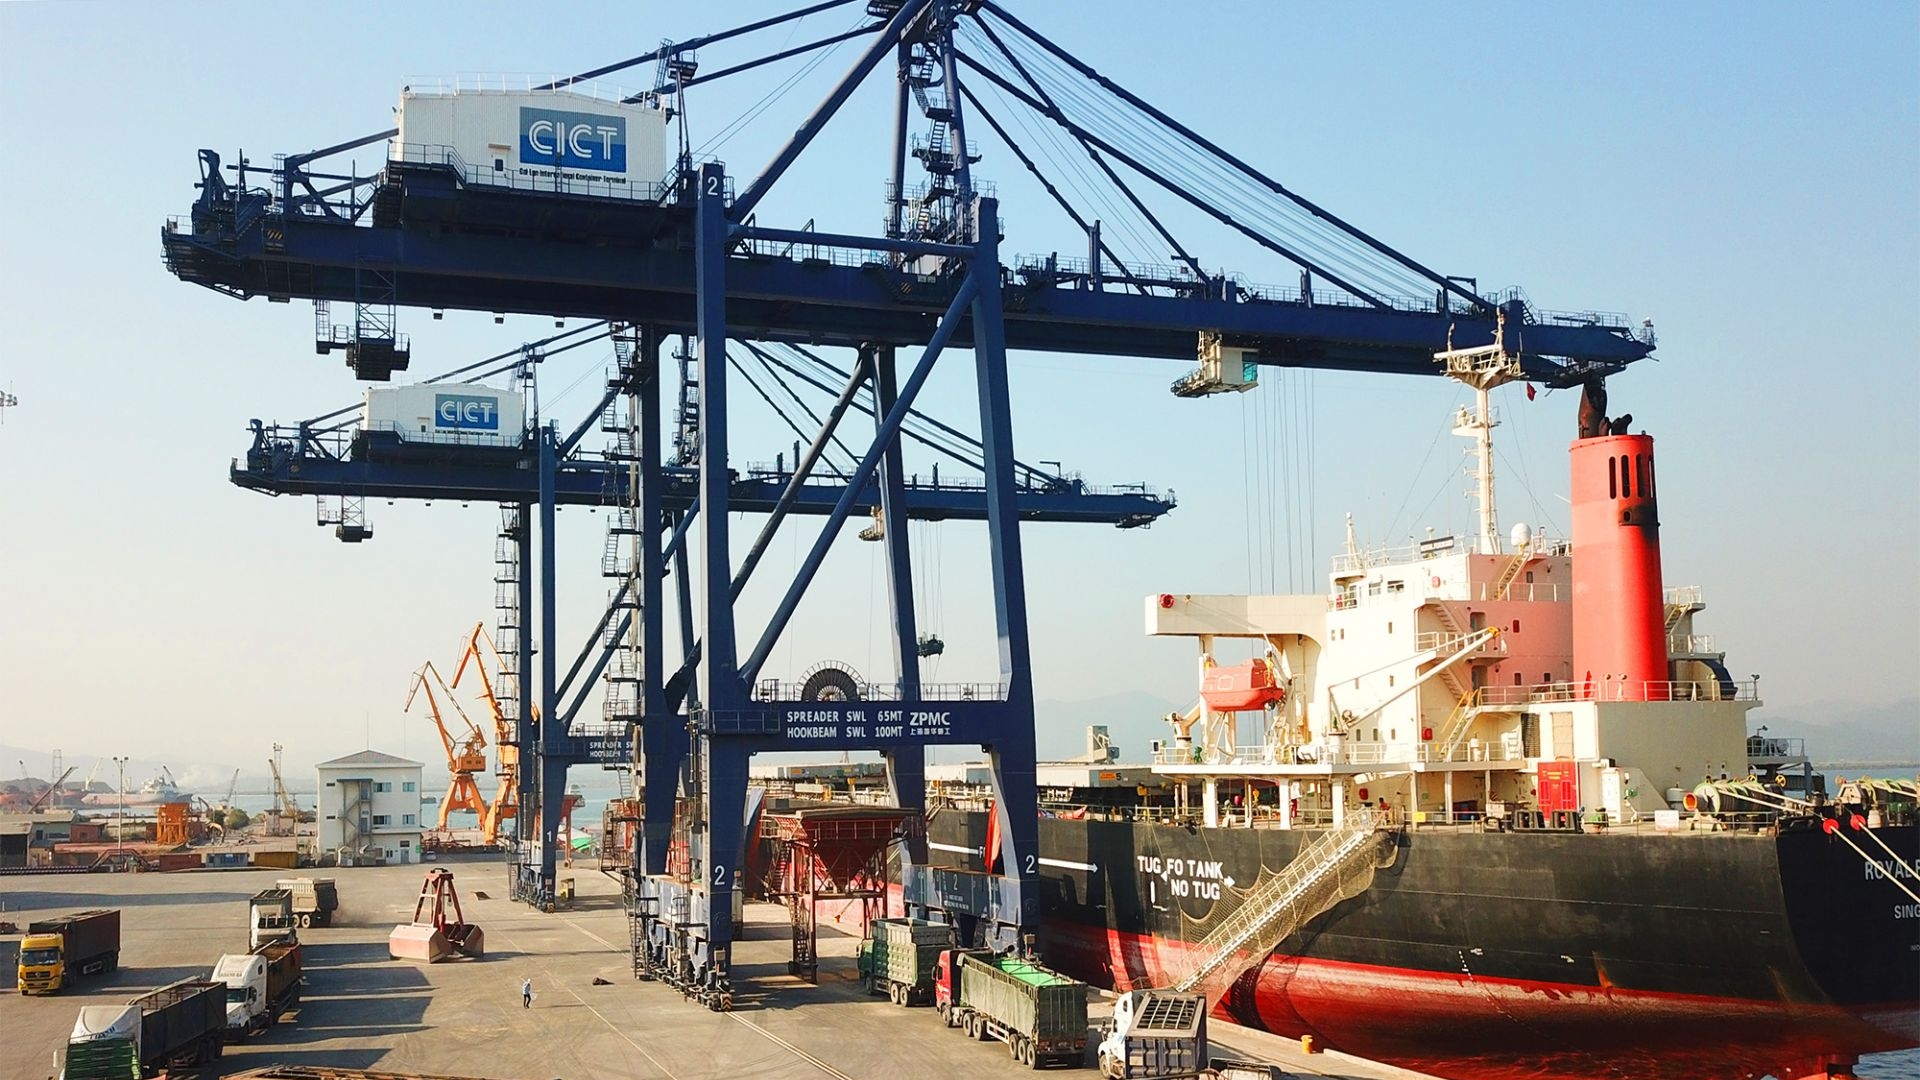 VCCI proposes working group to tackle container shortages